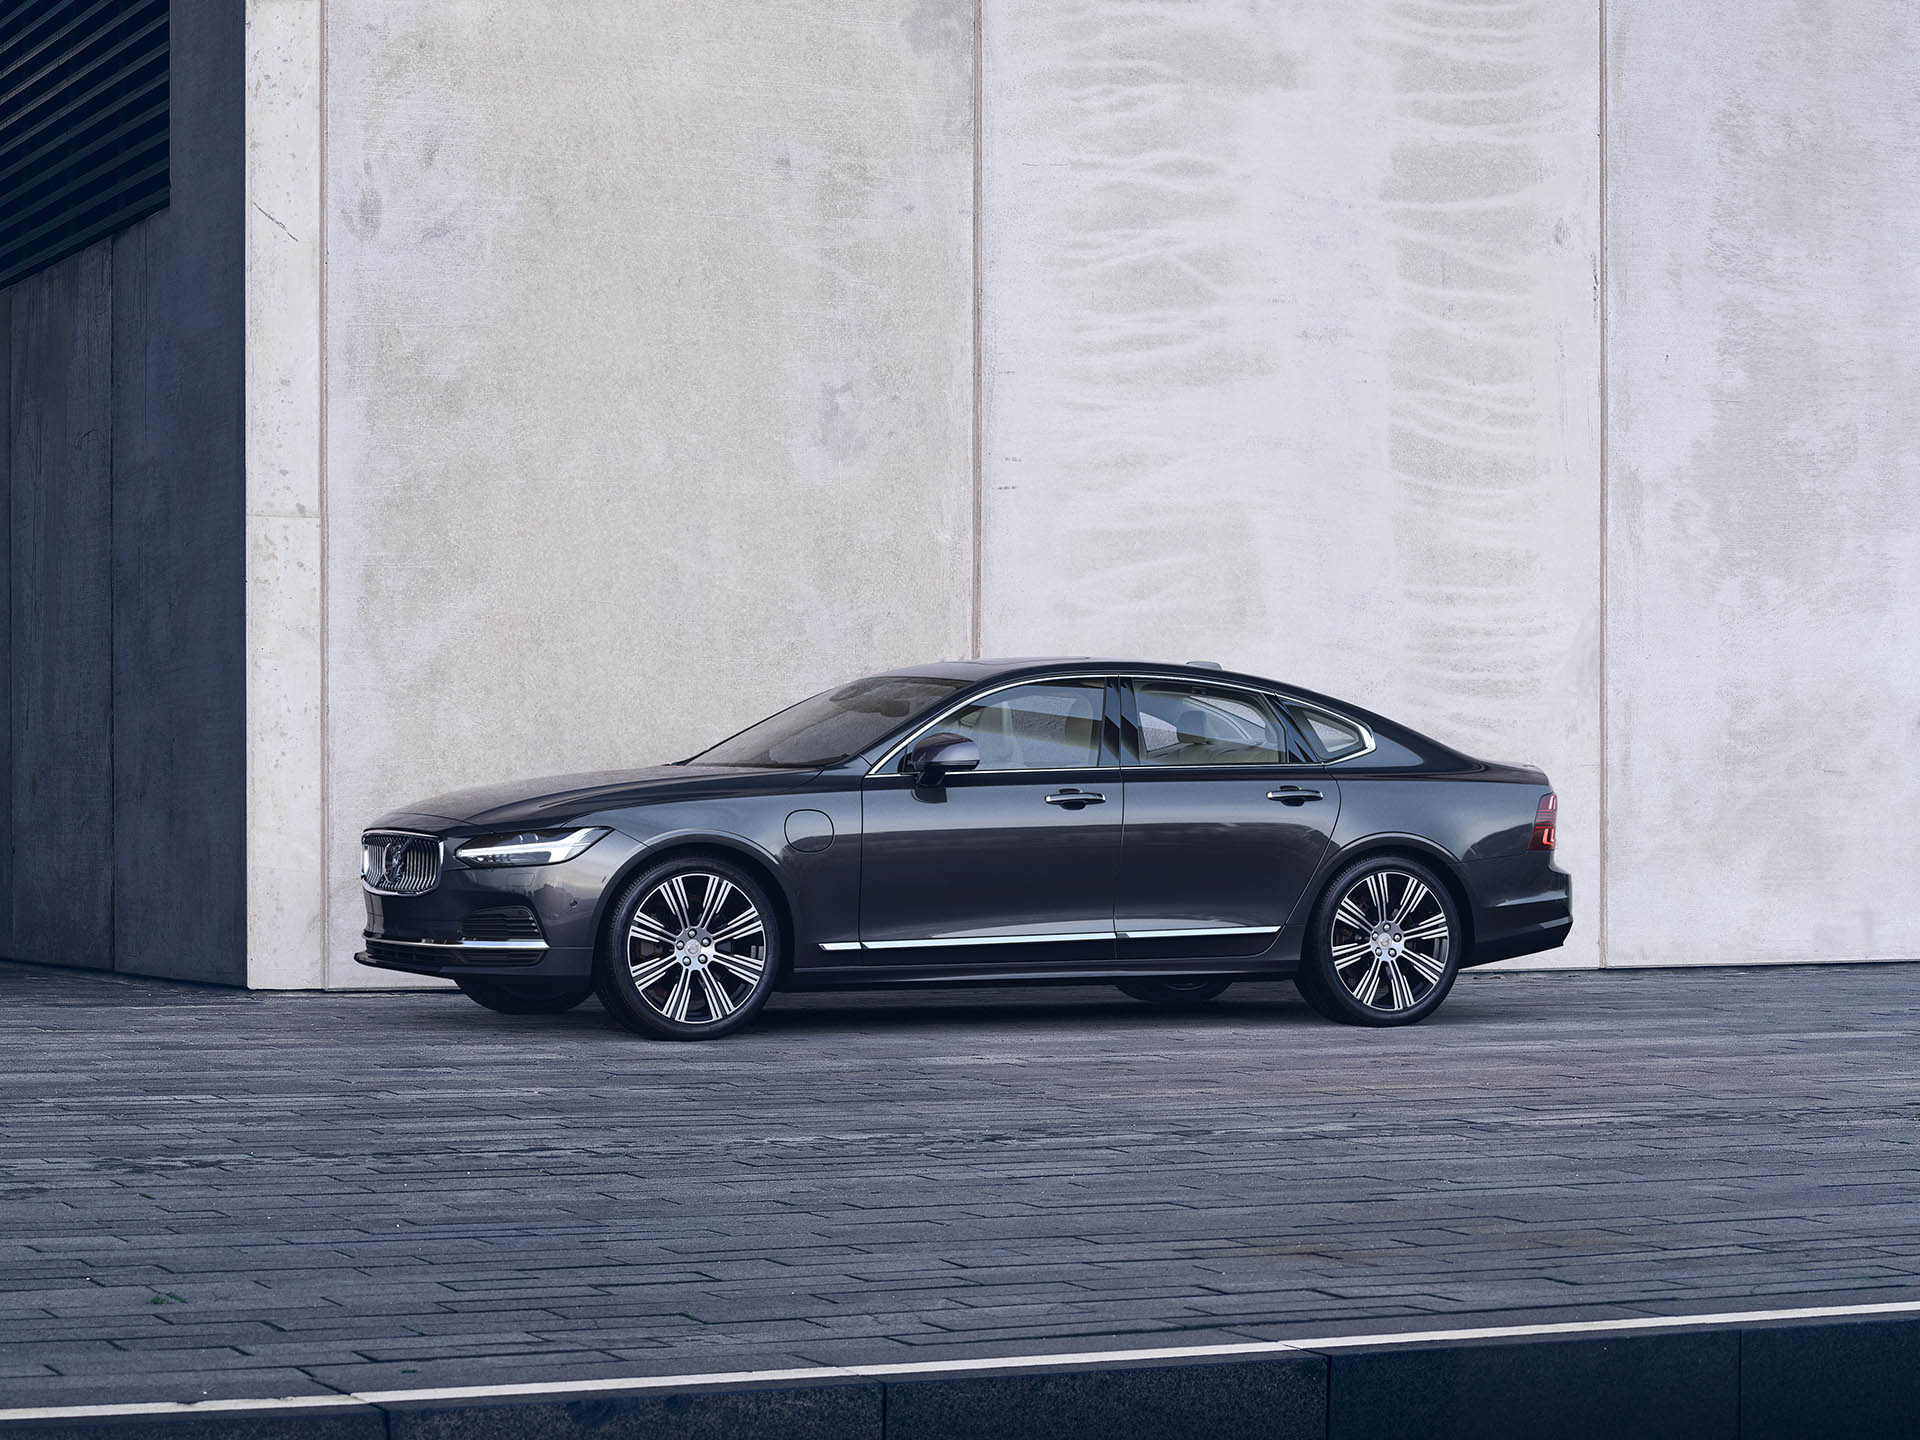 A Volvo S90 Sedan parked outside in front of a big wall